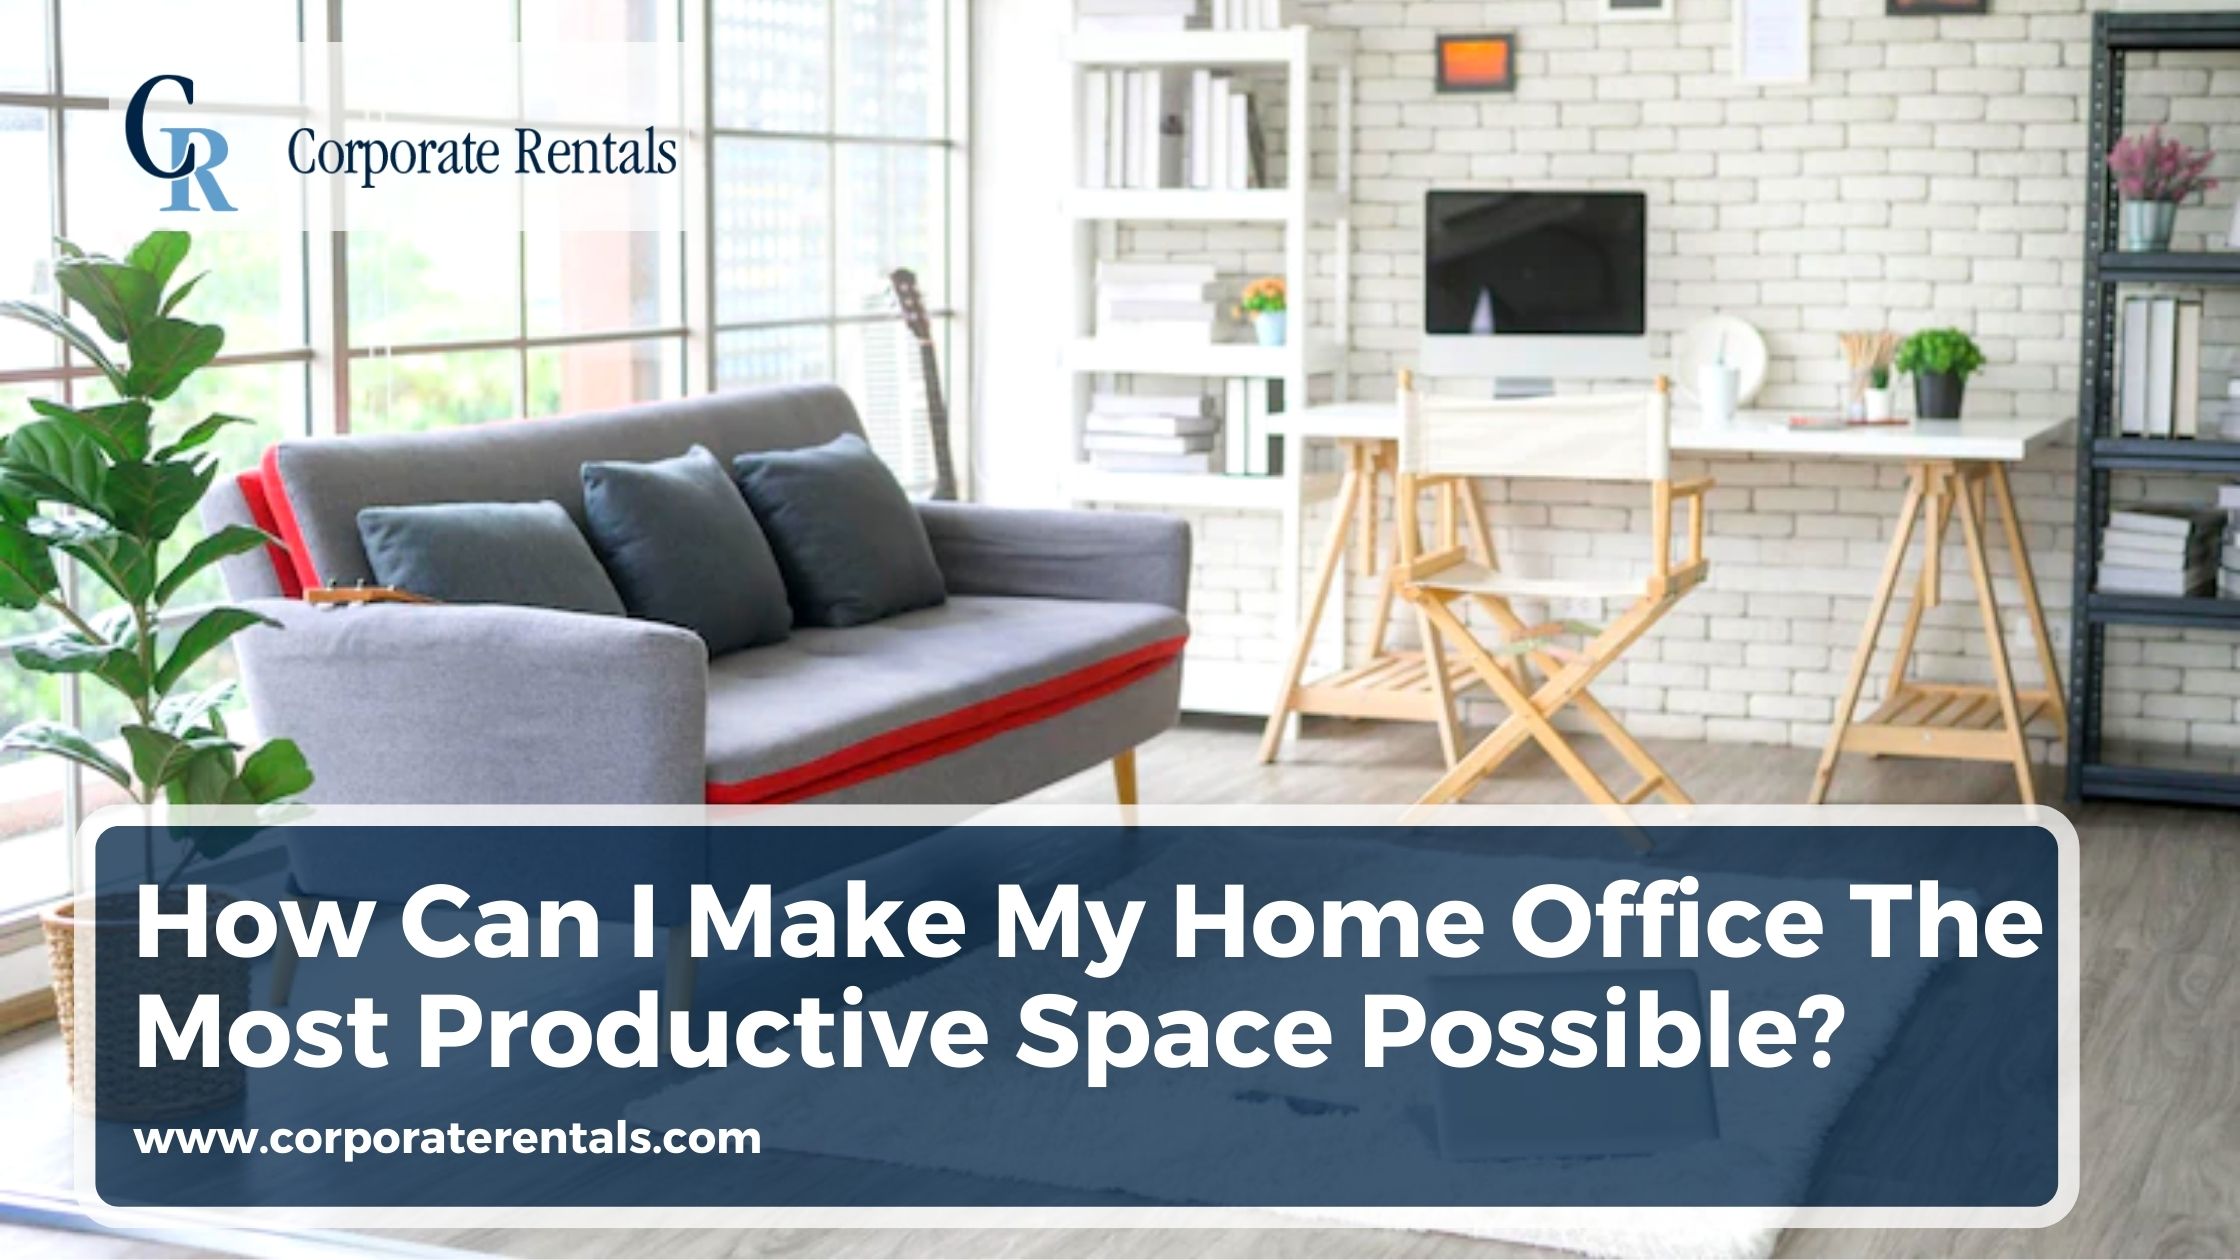 How can I Make My Home Office the Most Productive Space Possible?